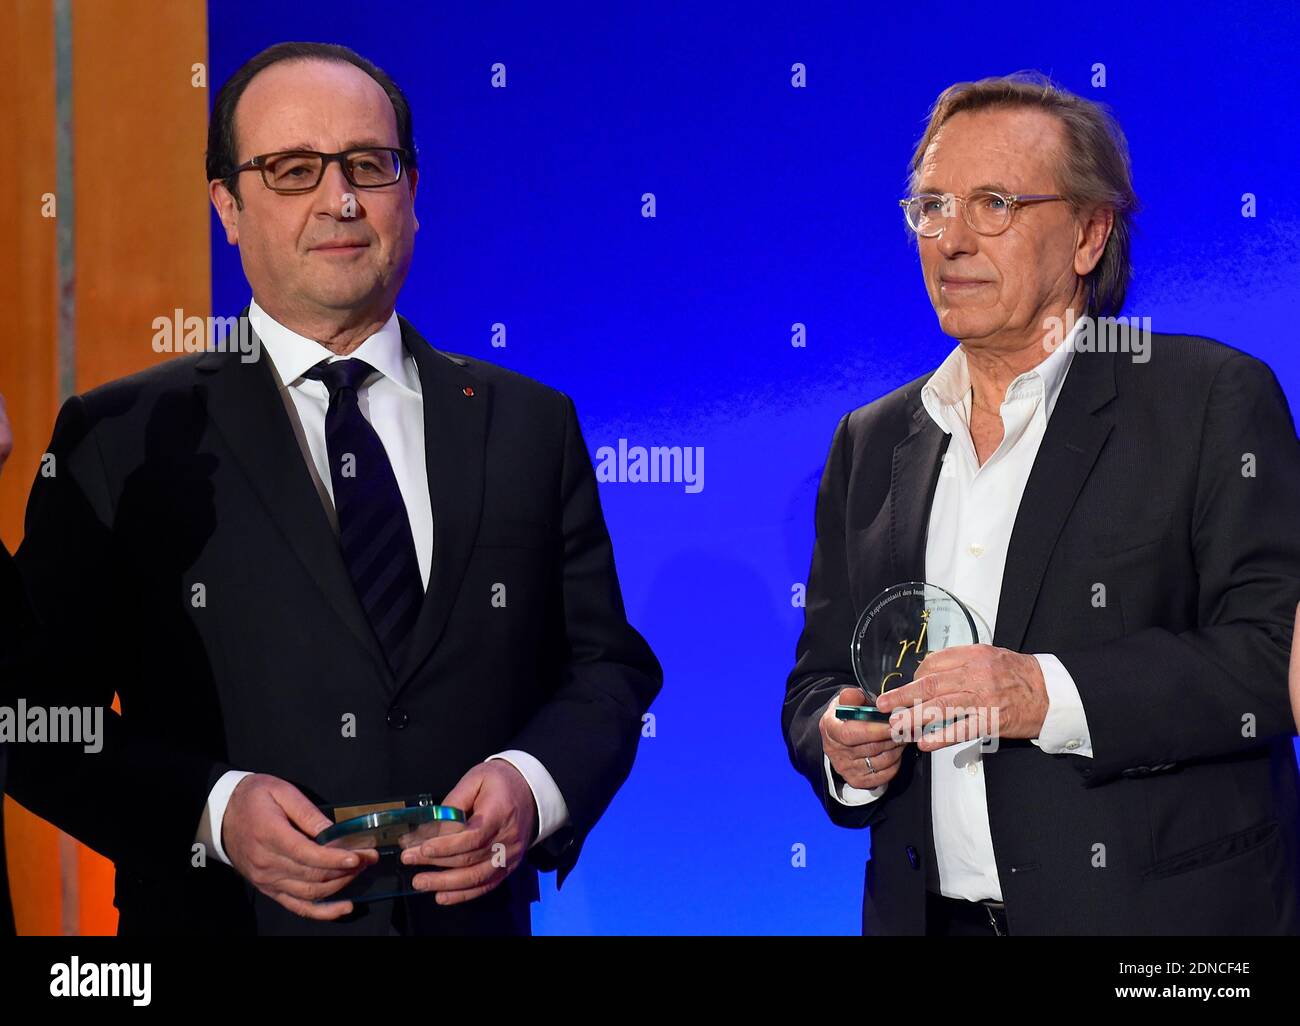 French President Francois Hollande presents director Alexander Arcady with a CRIF award during the 30th annual Dinner of the Representative Council of the Jews of France (CRIF) held at the Pullman Montparnasse Hotel in Paris, France on February 23, 2015. Photo Pool by Erez Lichtfeld/ABACAPRESS.COM Stock Photo